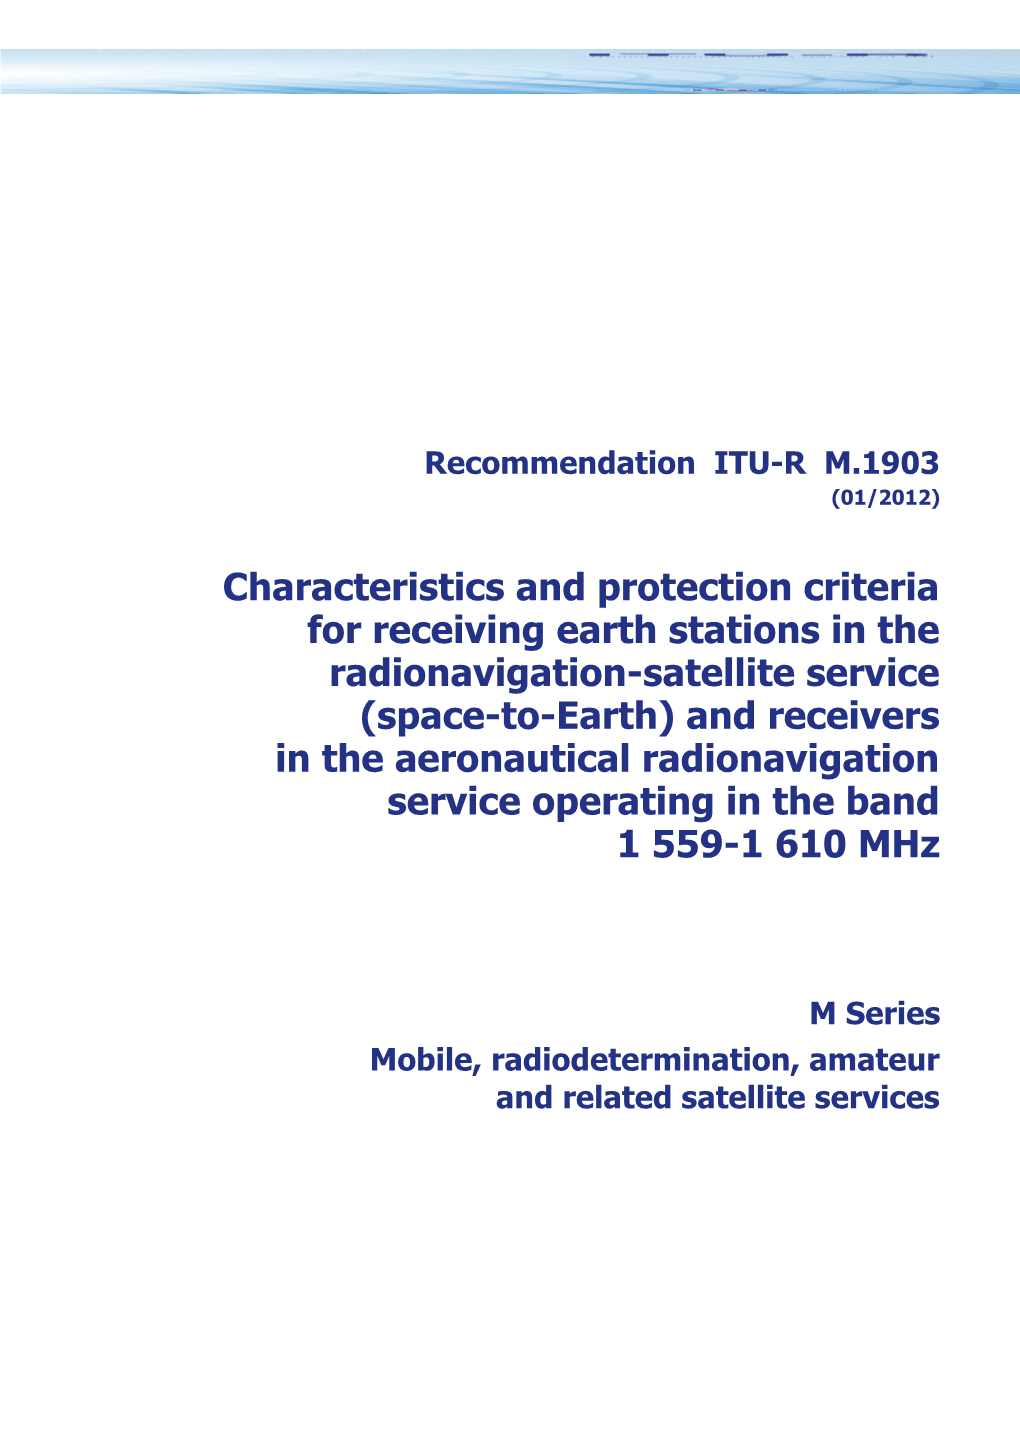 RECOMMENDATION ITU-R M.1903 - Characteristics and Protection Criteria for Receiving Earth